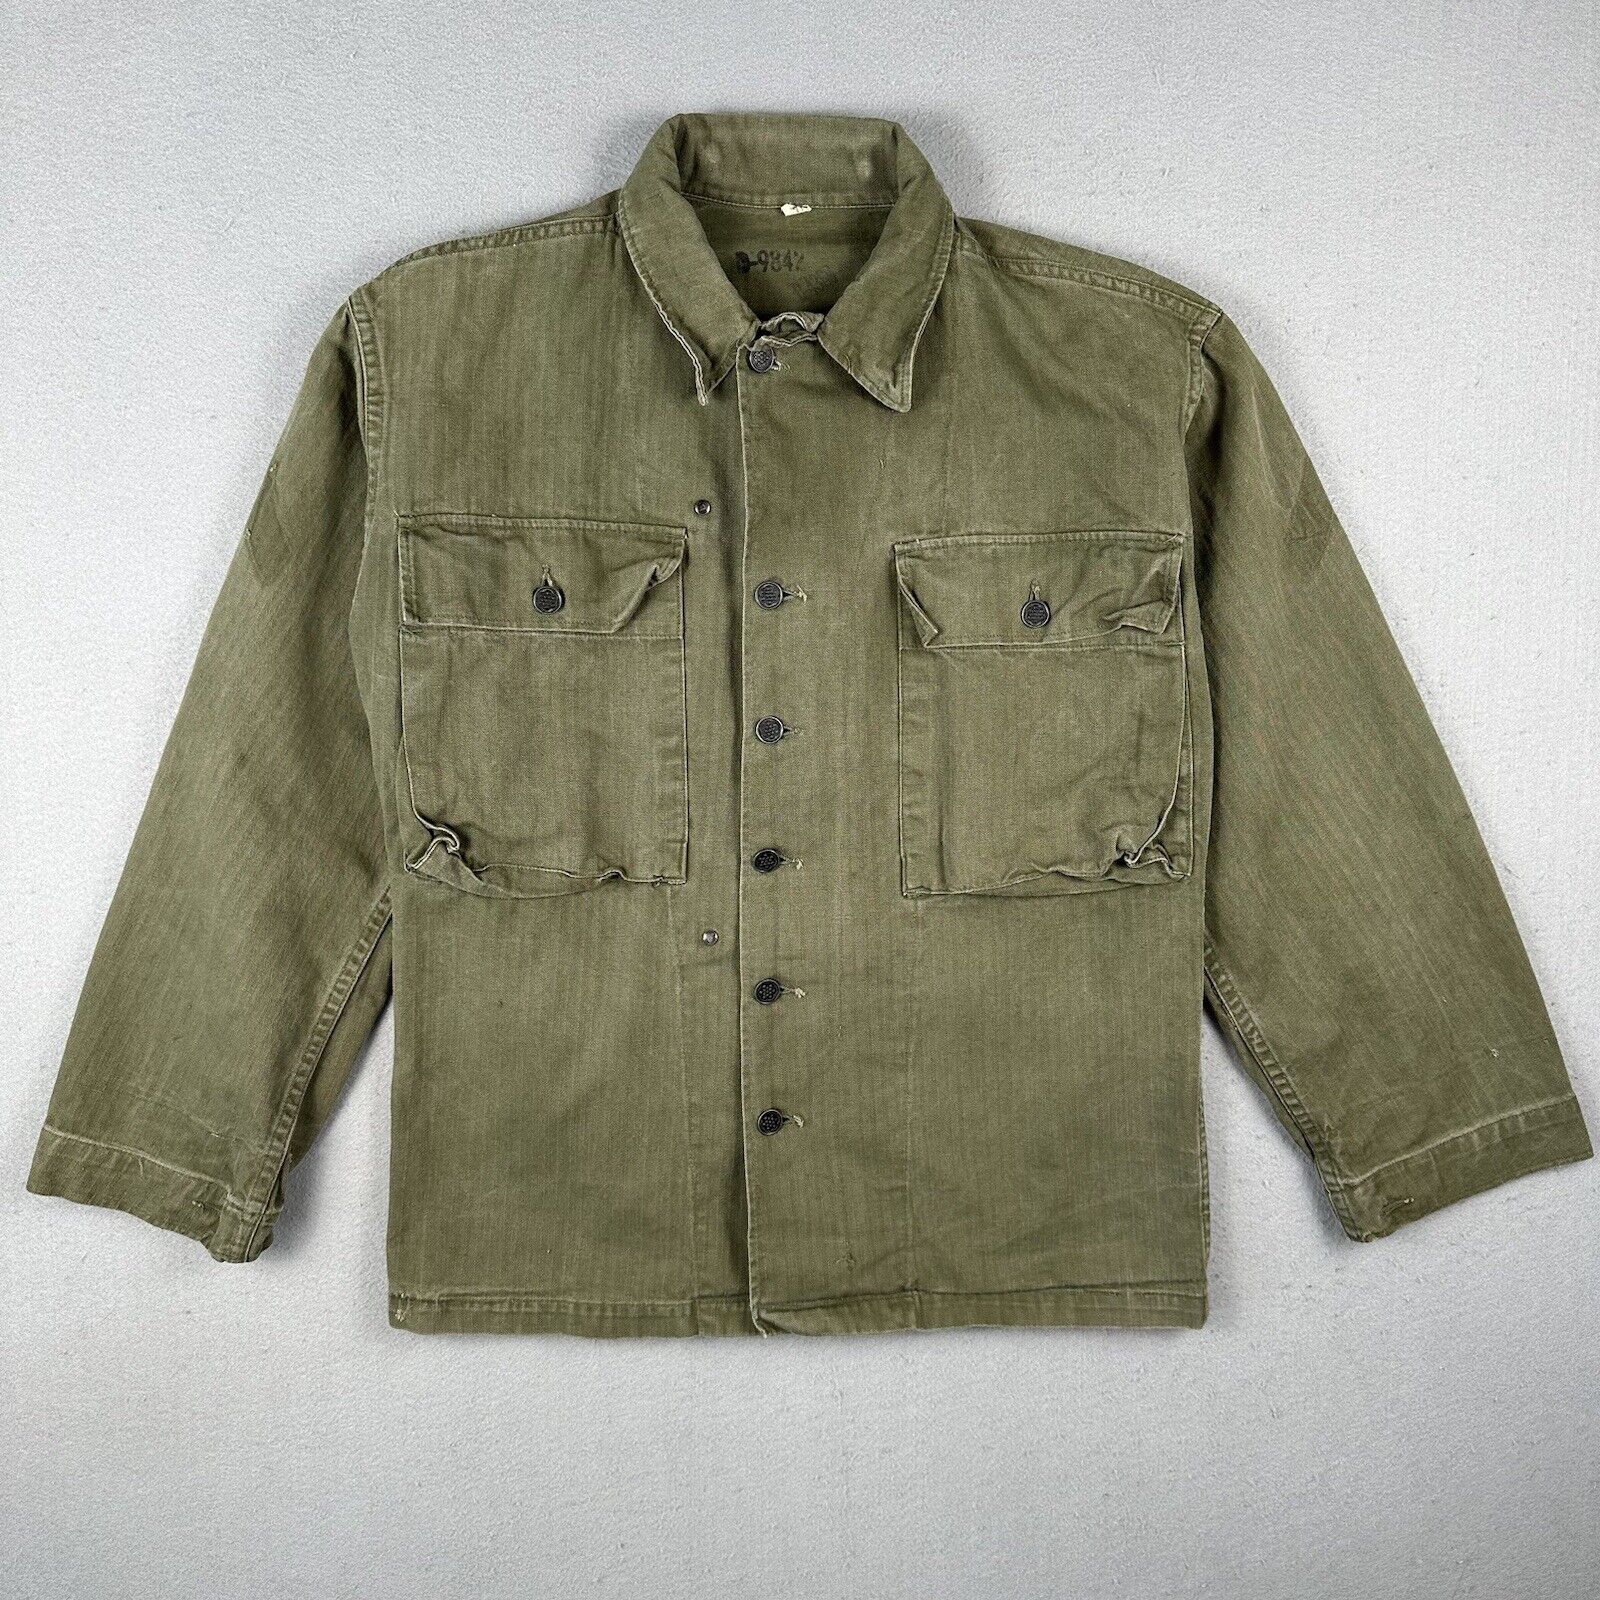 WW2 US Army HBT Jacket Shirt 13 Star 2nd Pattern Pleated Pockets 34r Private